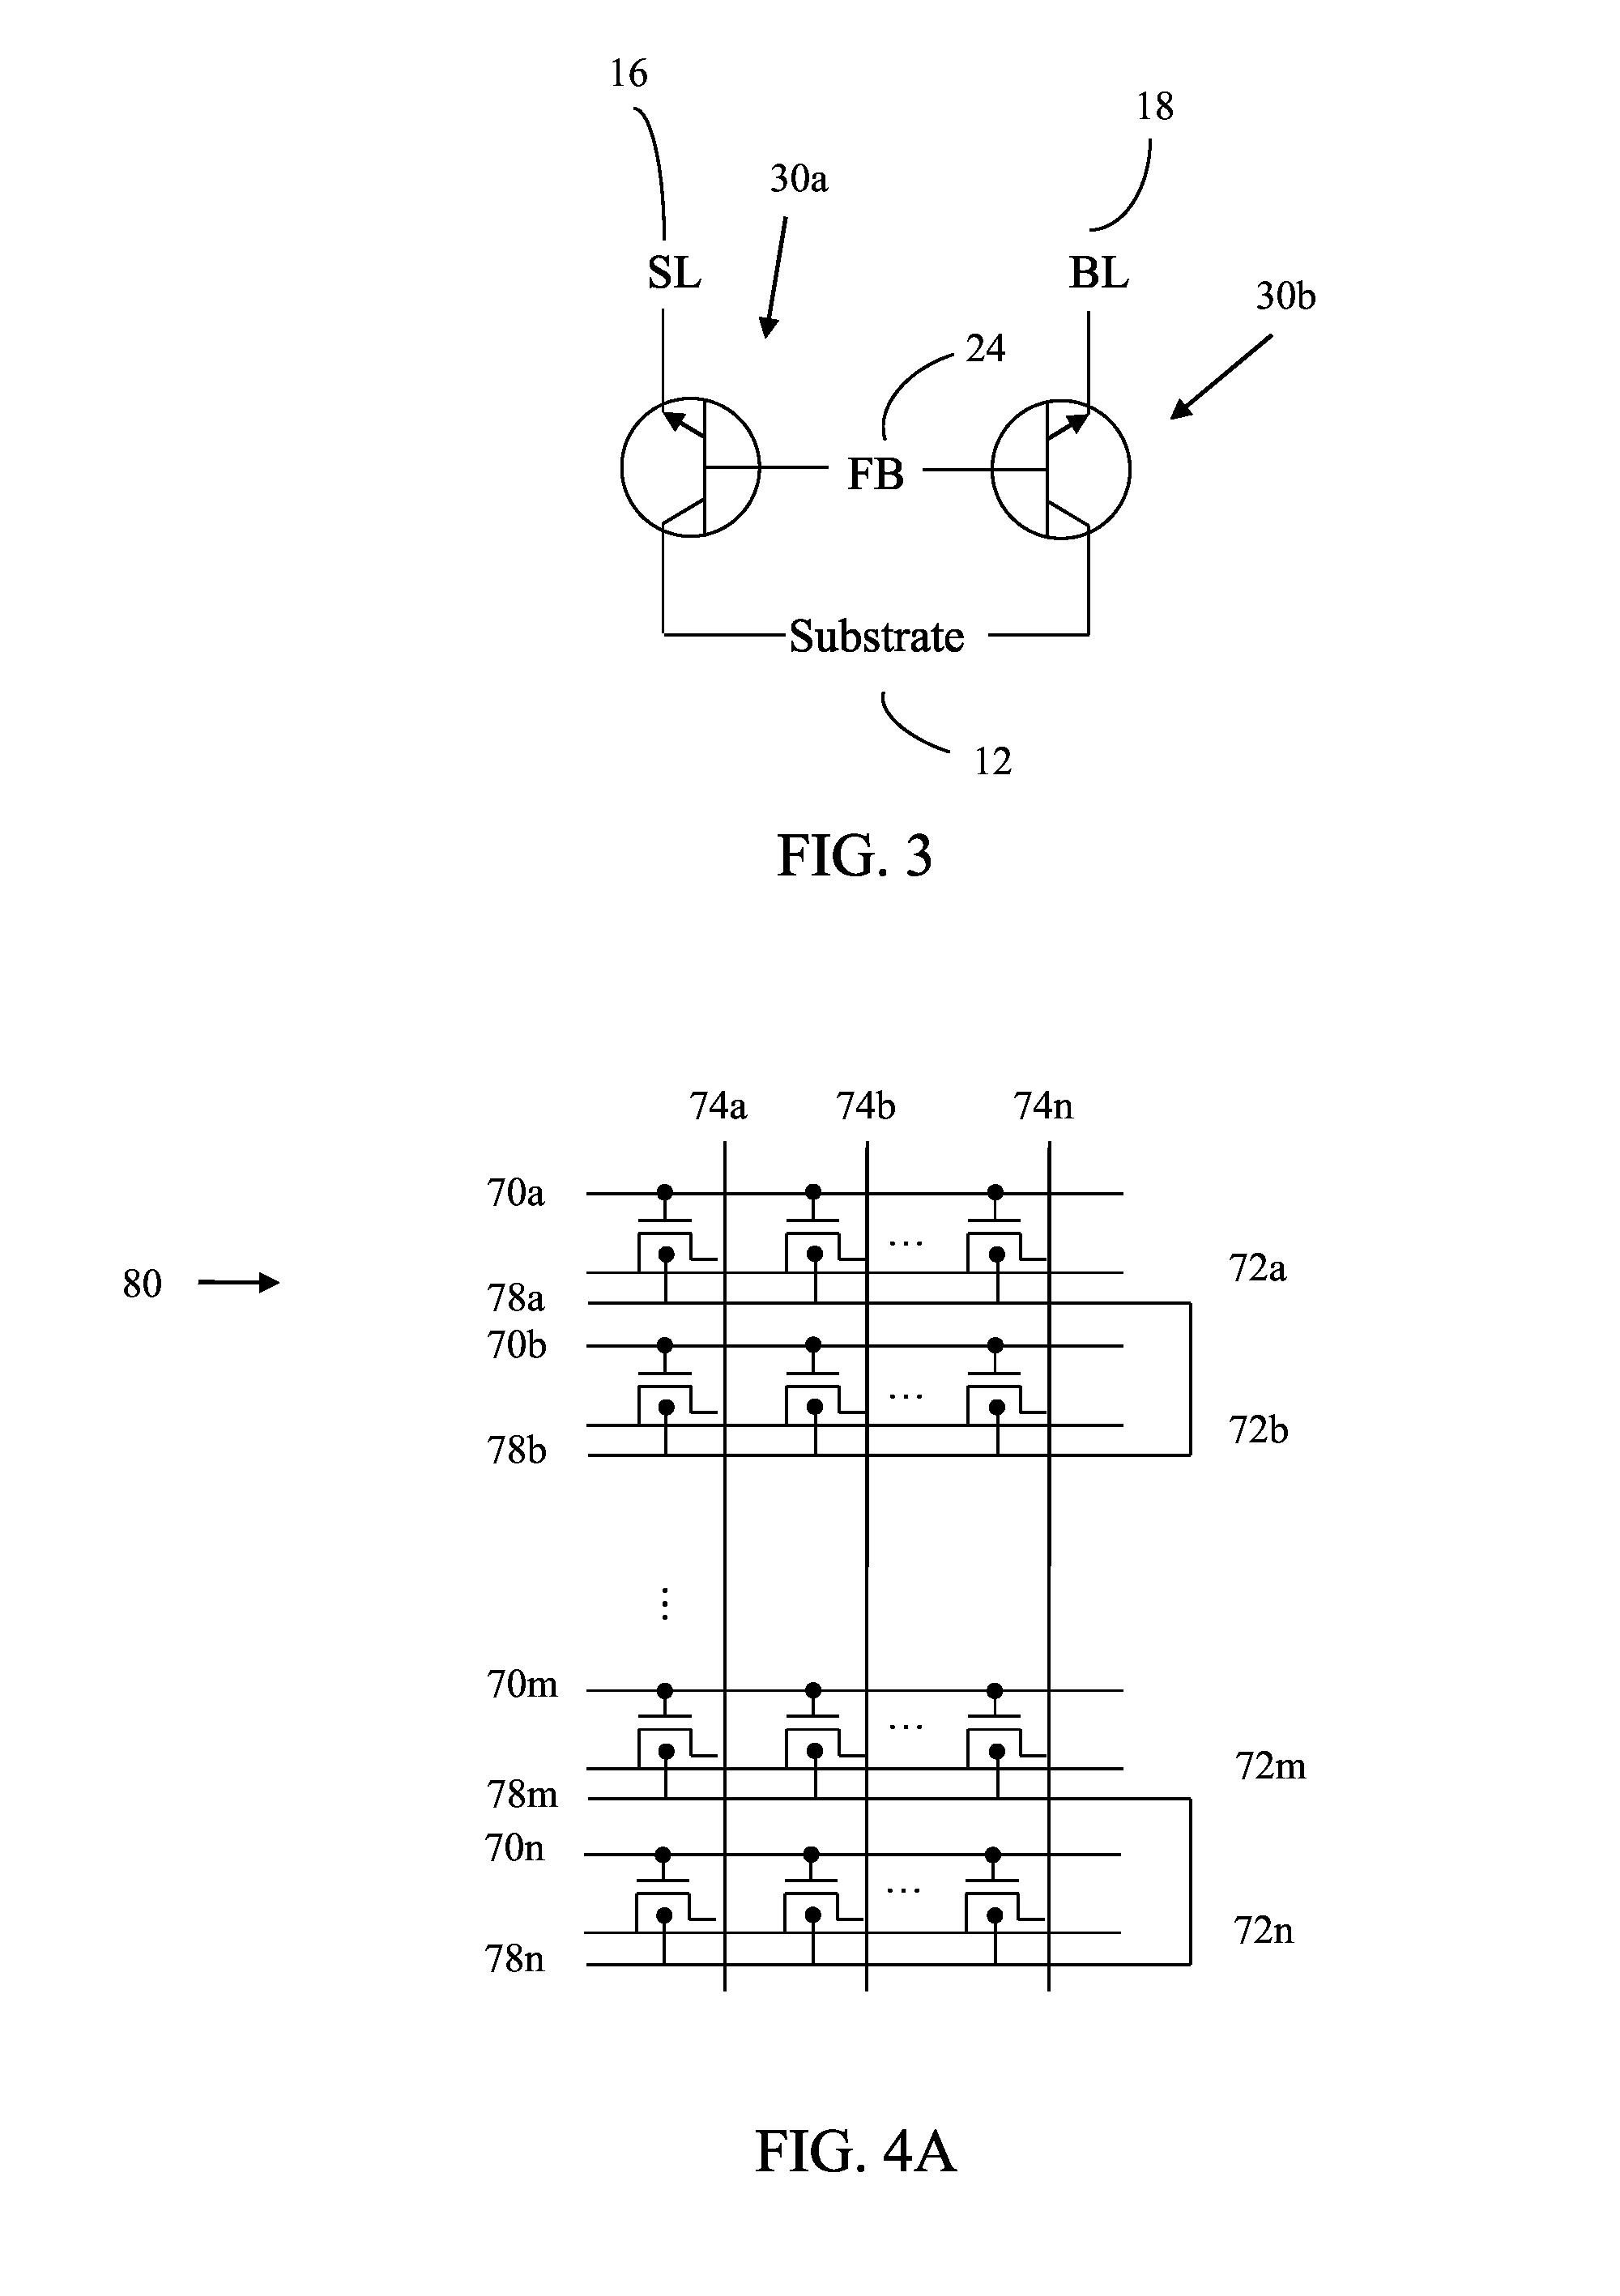 Semiconductor Memory Device Having Electrically Floating Body Transistor, Semiconductor Memory Device Having Both Volatile and Non-Volatile Functionality and Method of Operating